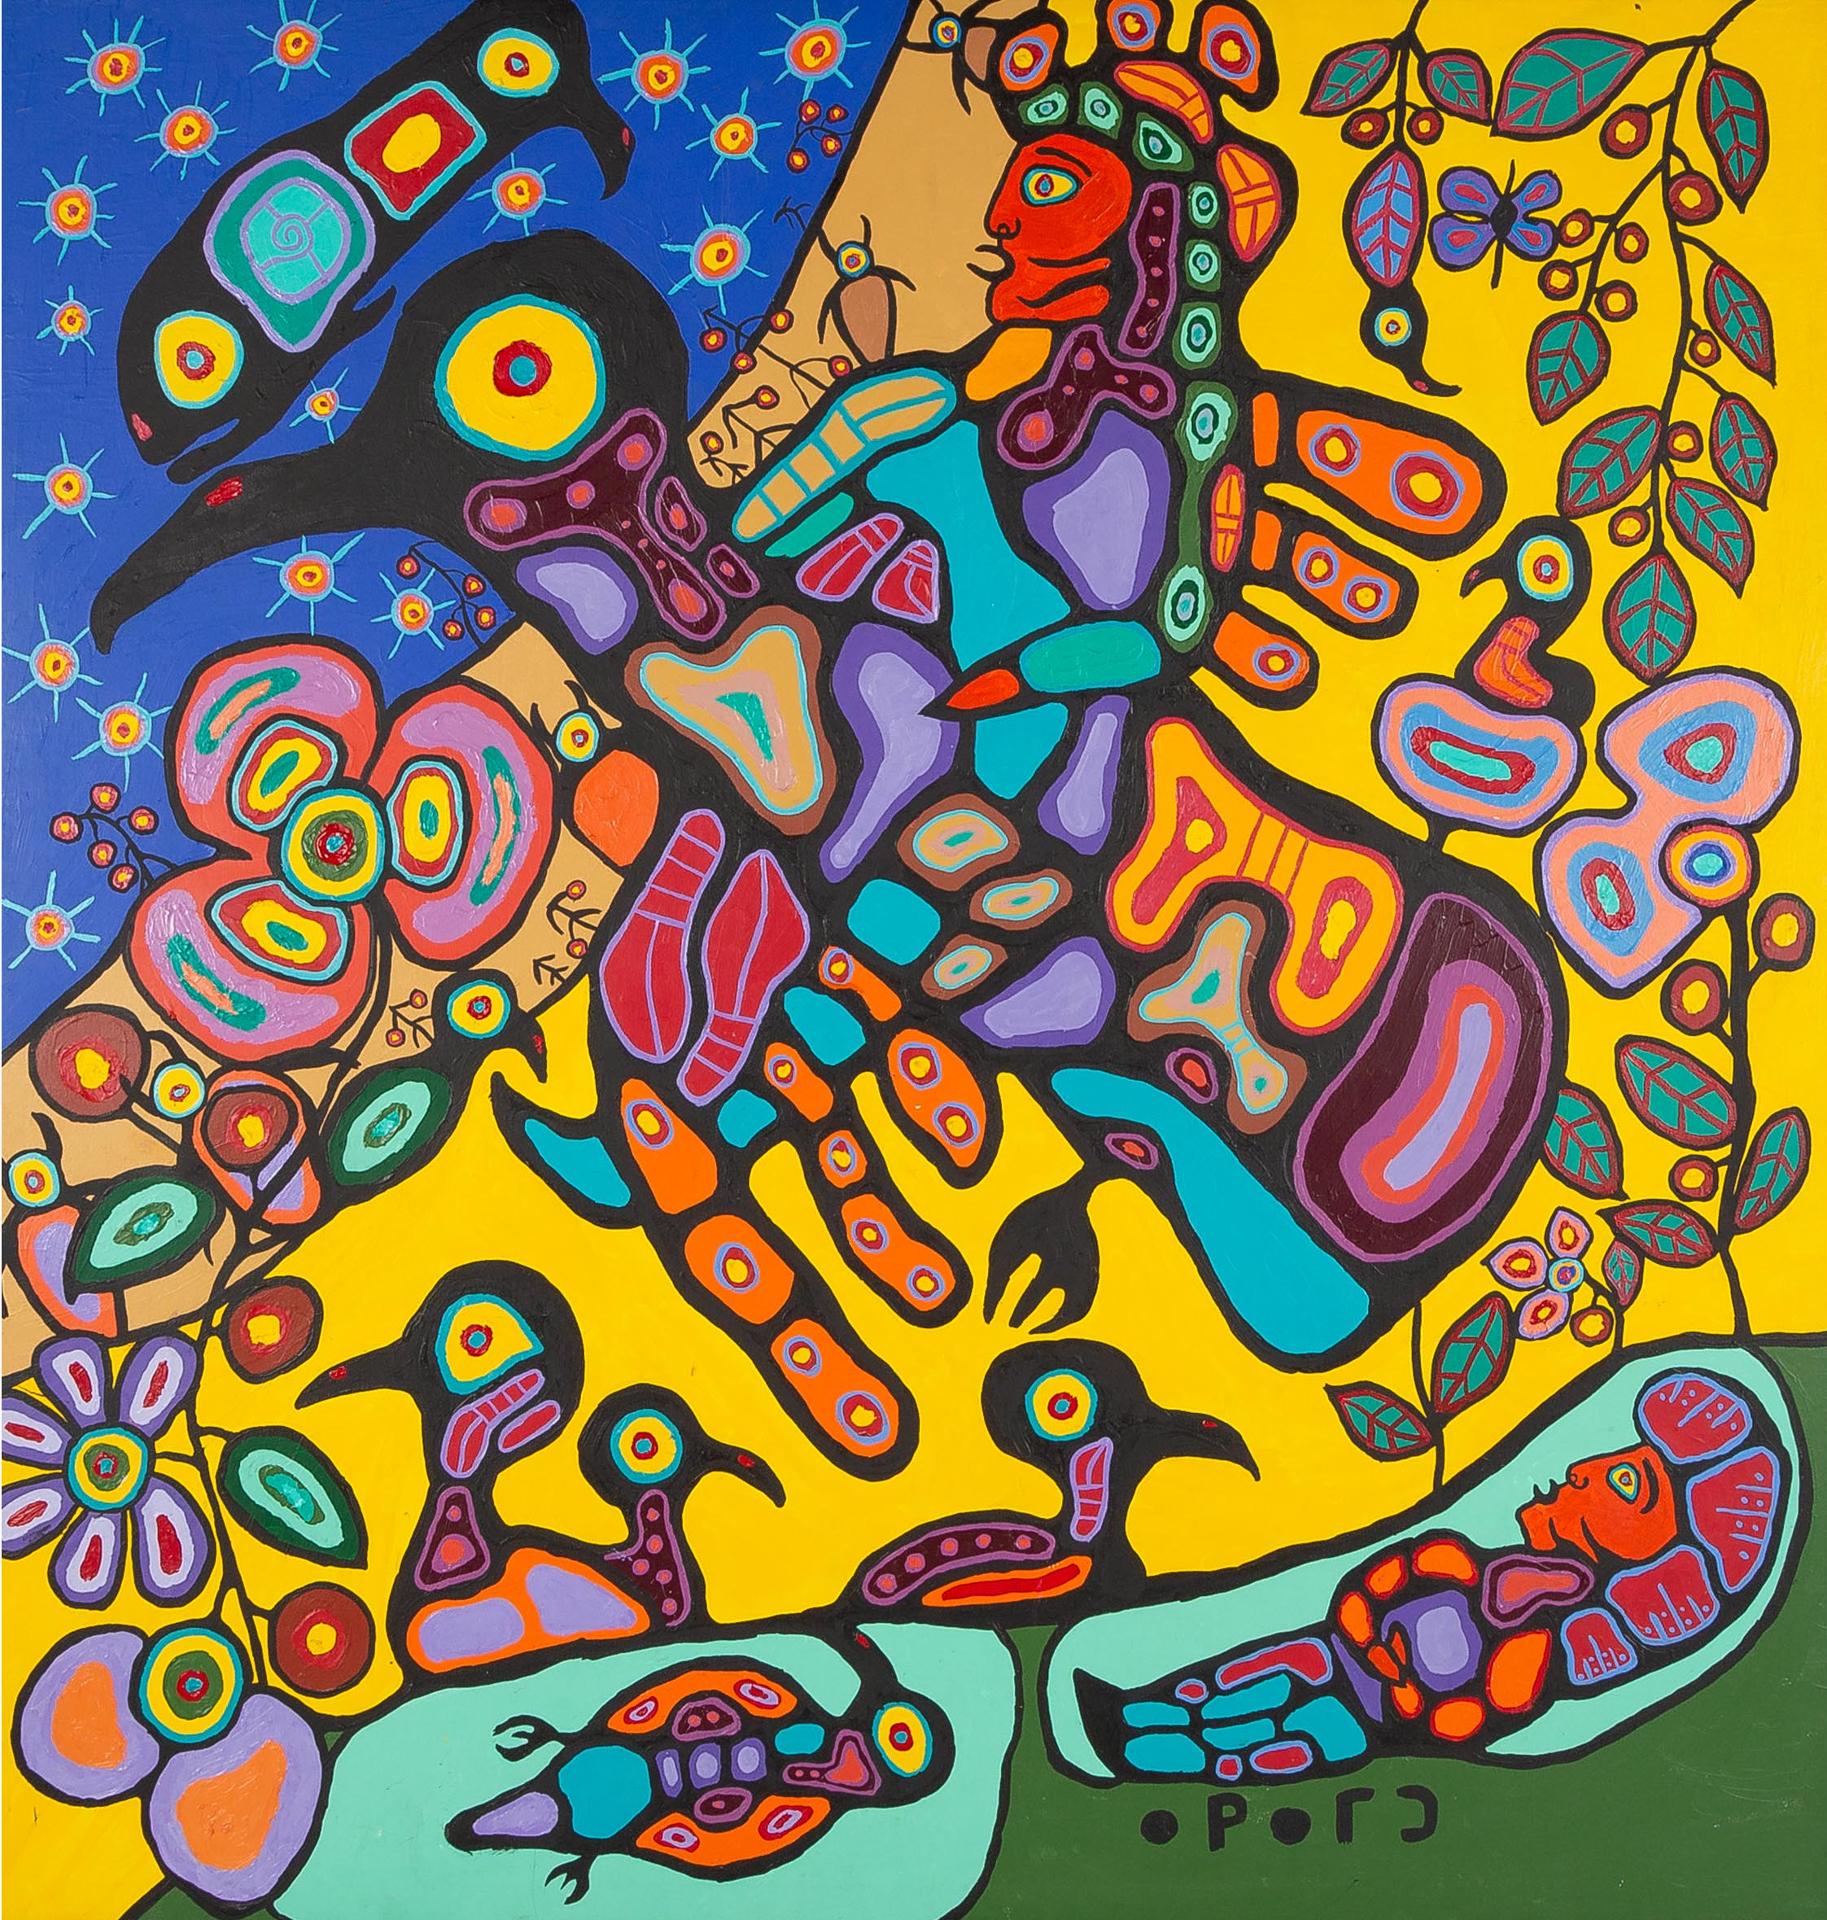 Christian Morrisseau (1969) - Flight Of The Red Thunderbird Into The Astral Plain